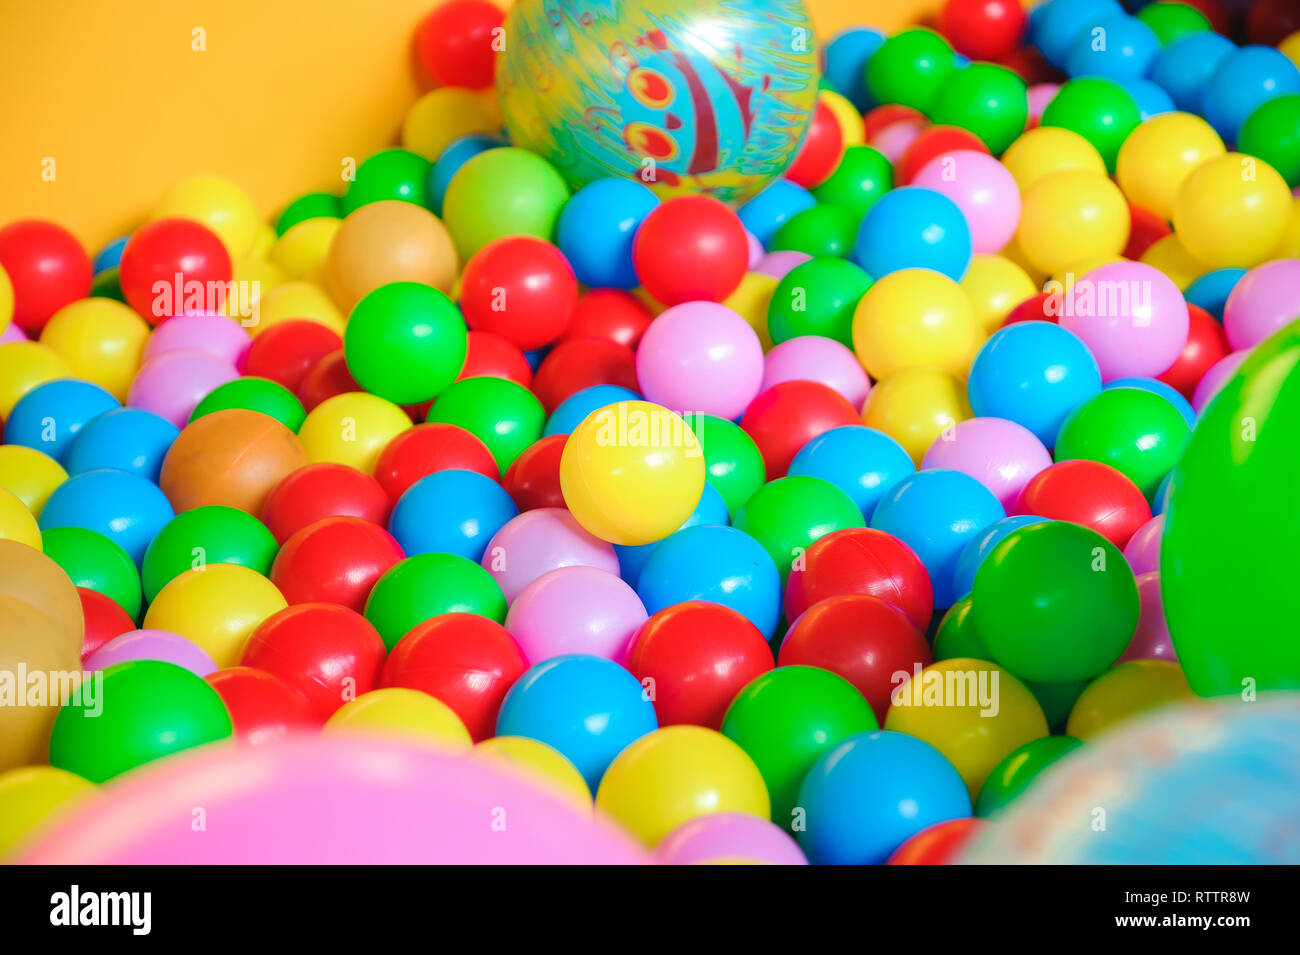 Indoor playground with colorful plastic balls for children Stock Photo